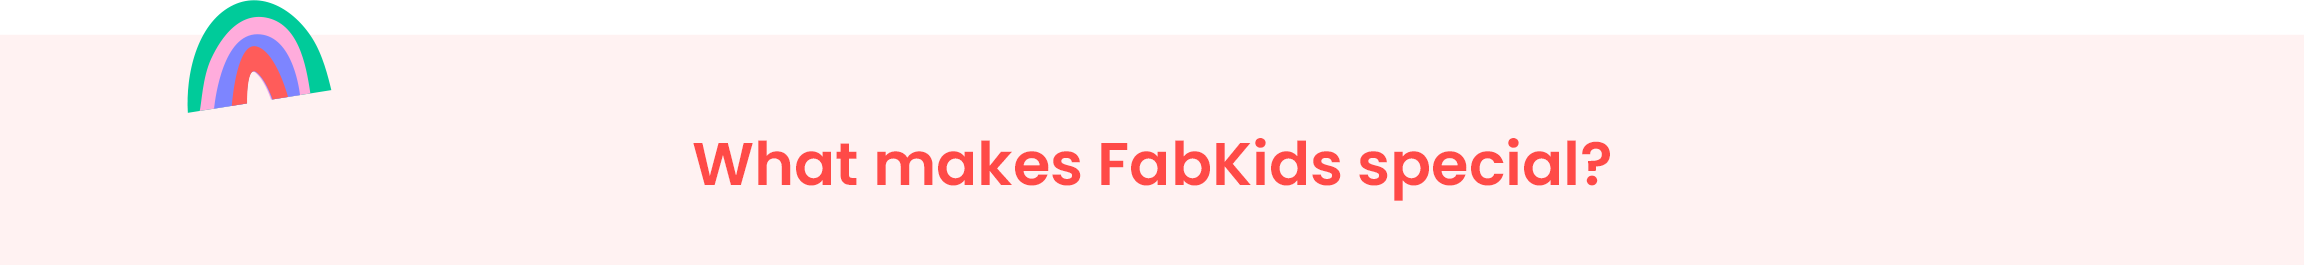 What makes FabKids special